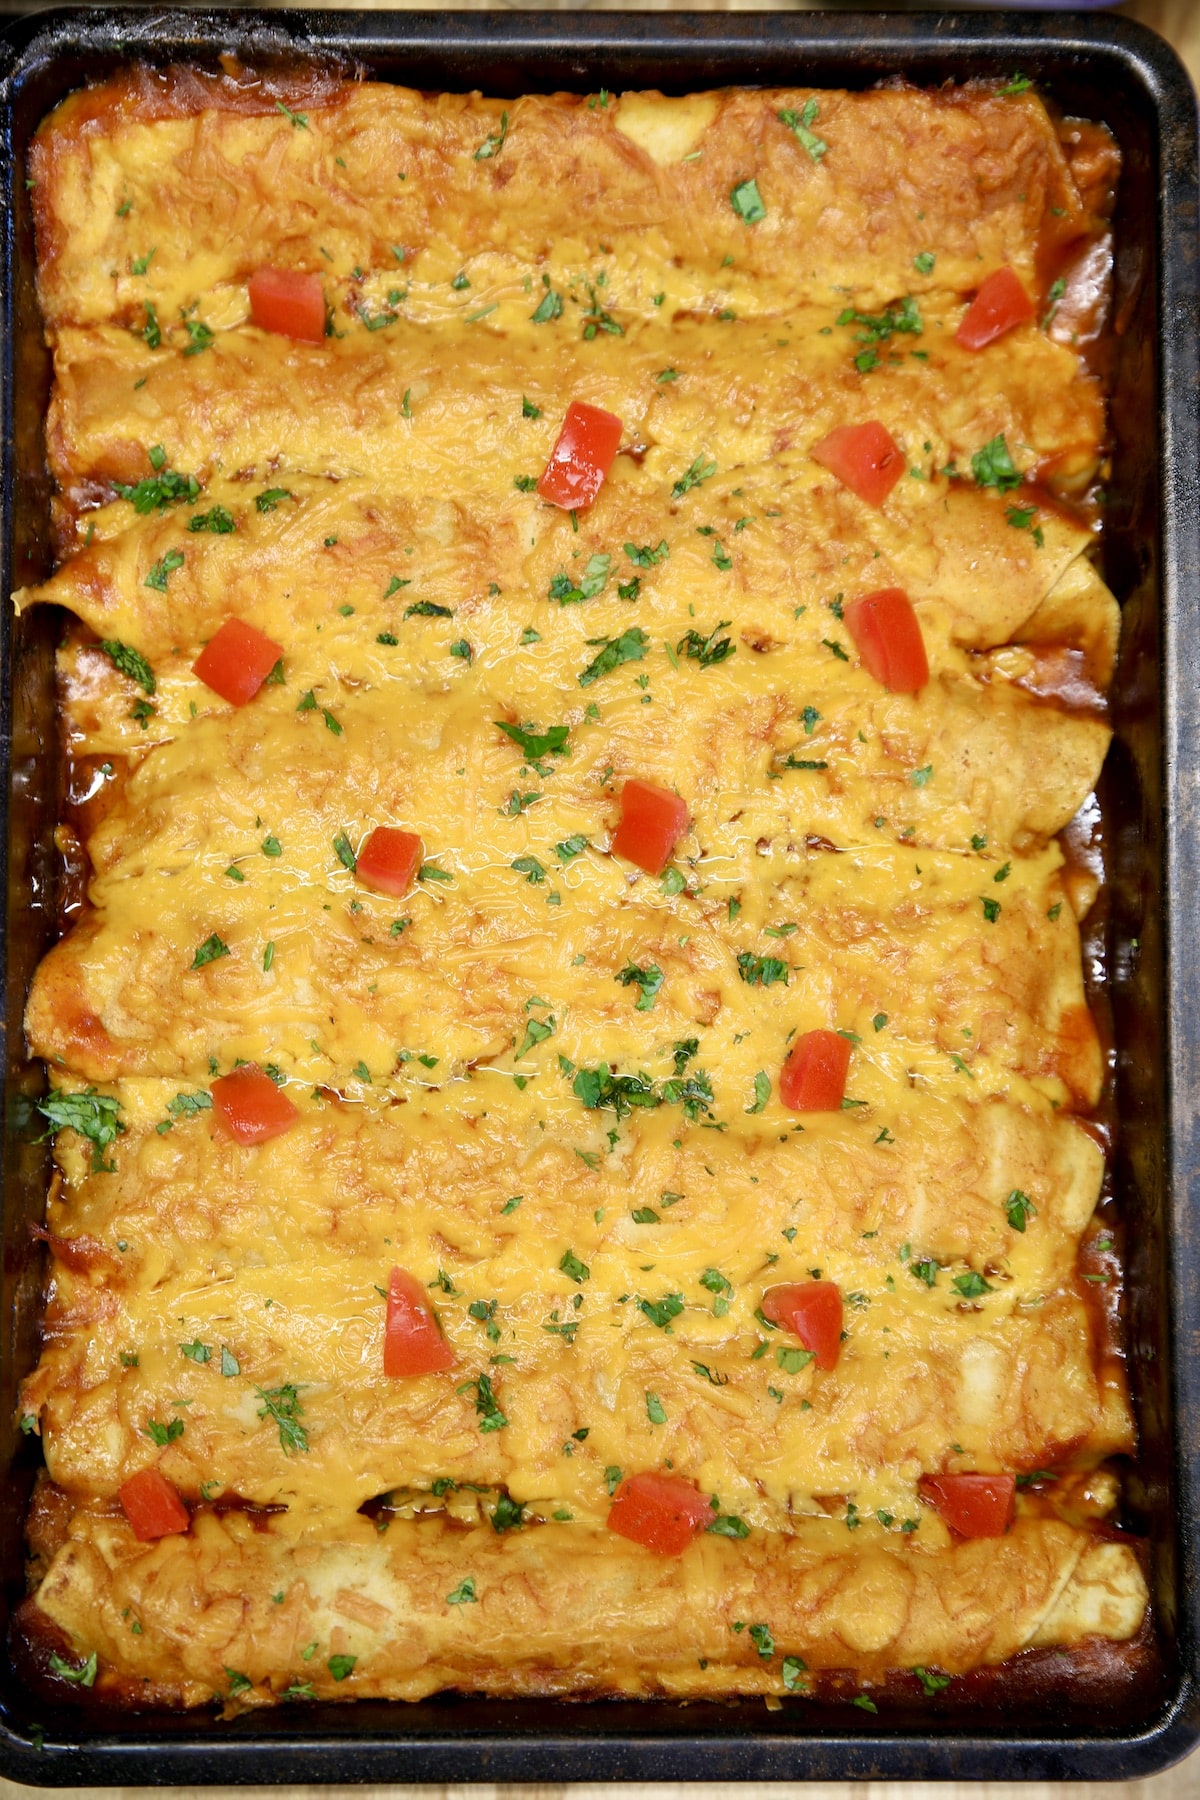 Pan of pork enchiladas topped with cheese and jalapenos.